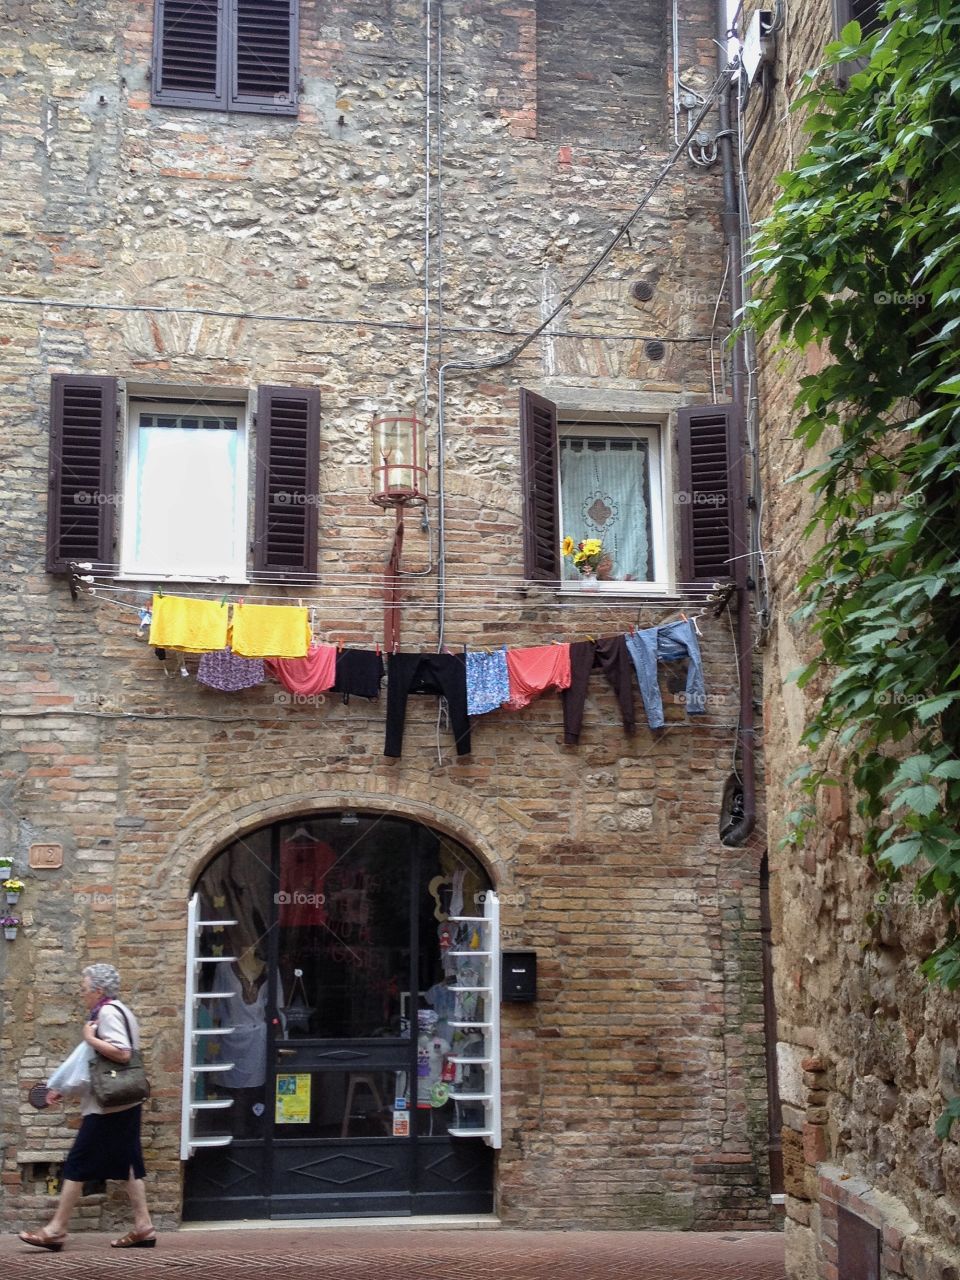 Laundry hanging on stone wall